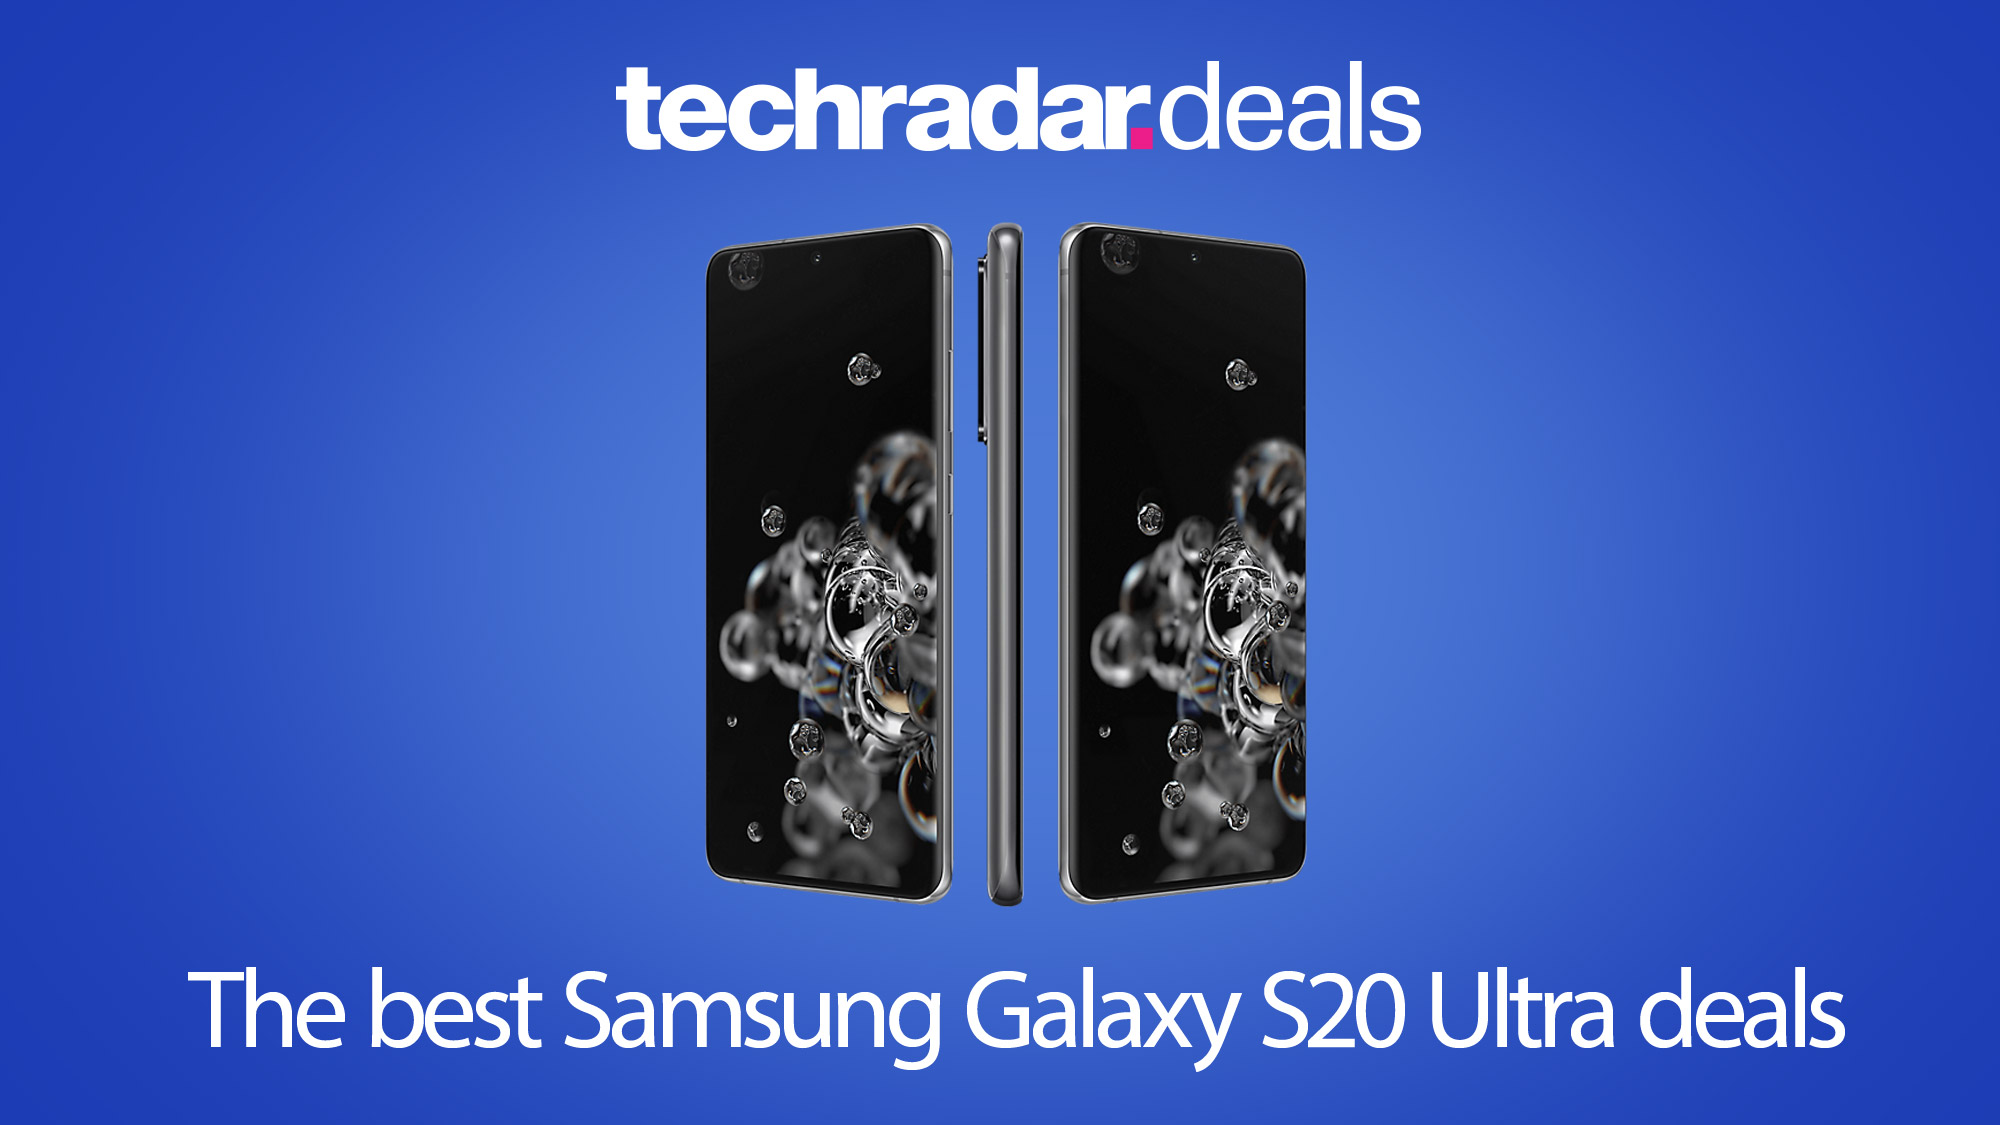 Samsung Galaxy S20 Ultra: Price, specs and best deals